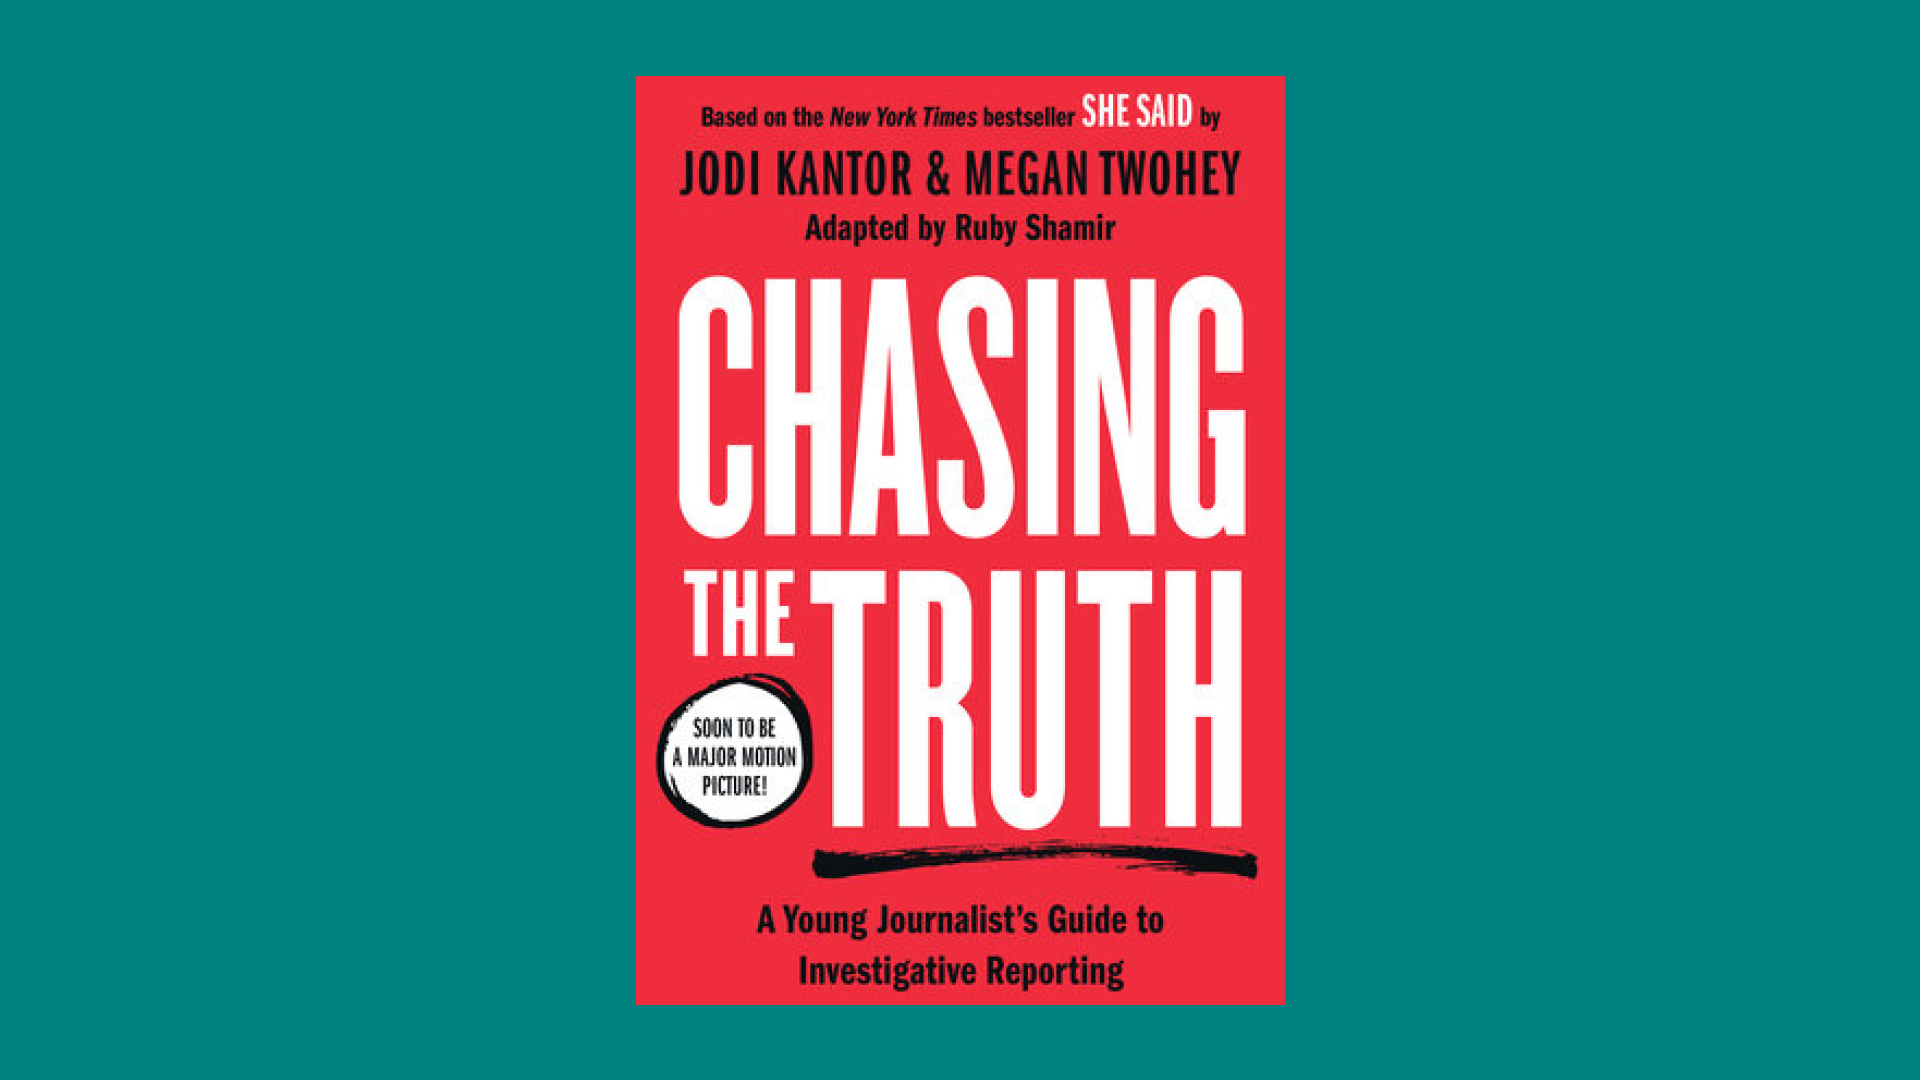 “Chasing the Truth: A Young Journalist's Guide to Investigative Reporting” by Jodi Kantor & Megan Twohey, Adapted by Ruby Shamir 